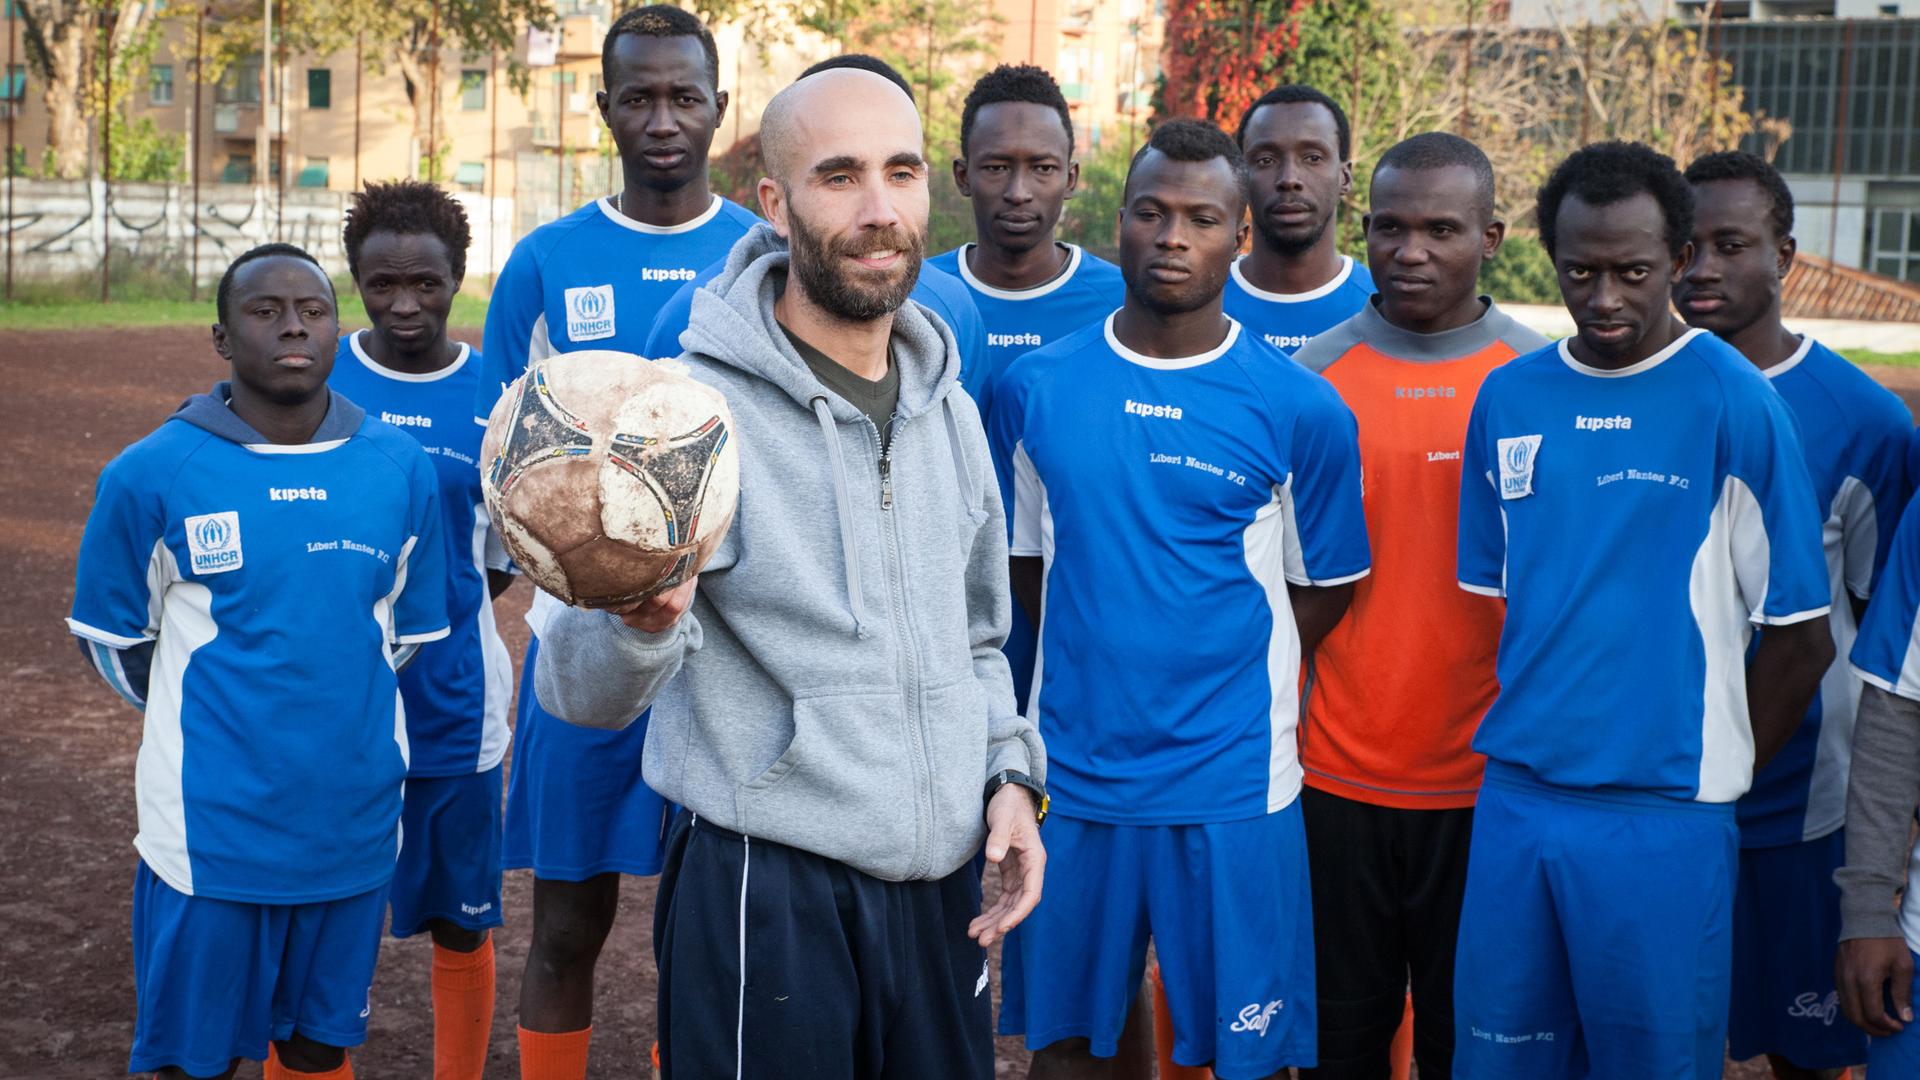 Coach Salvatore Lisciandrello and some of this year's Liberi Nantes players